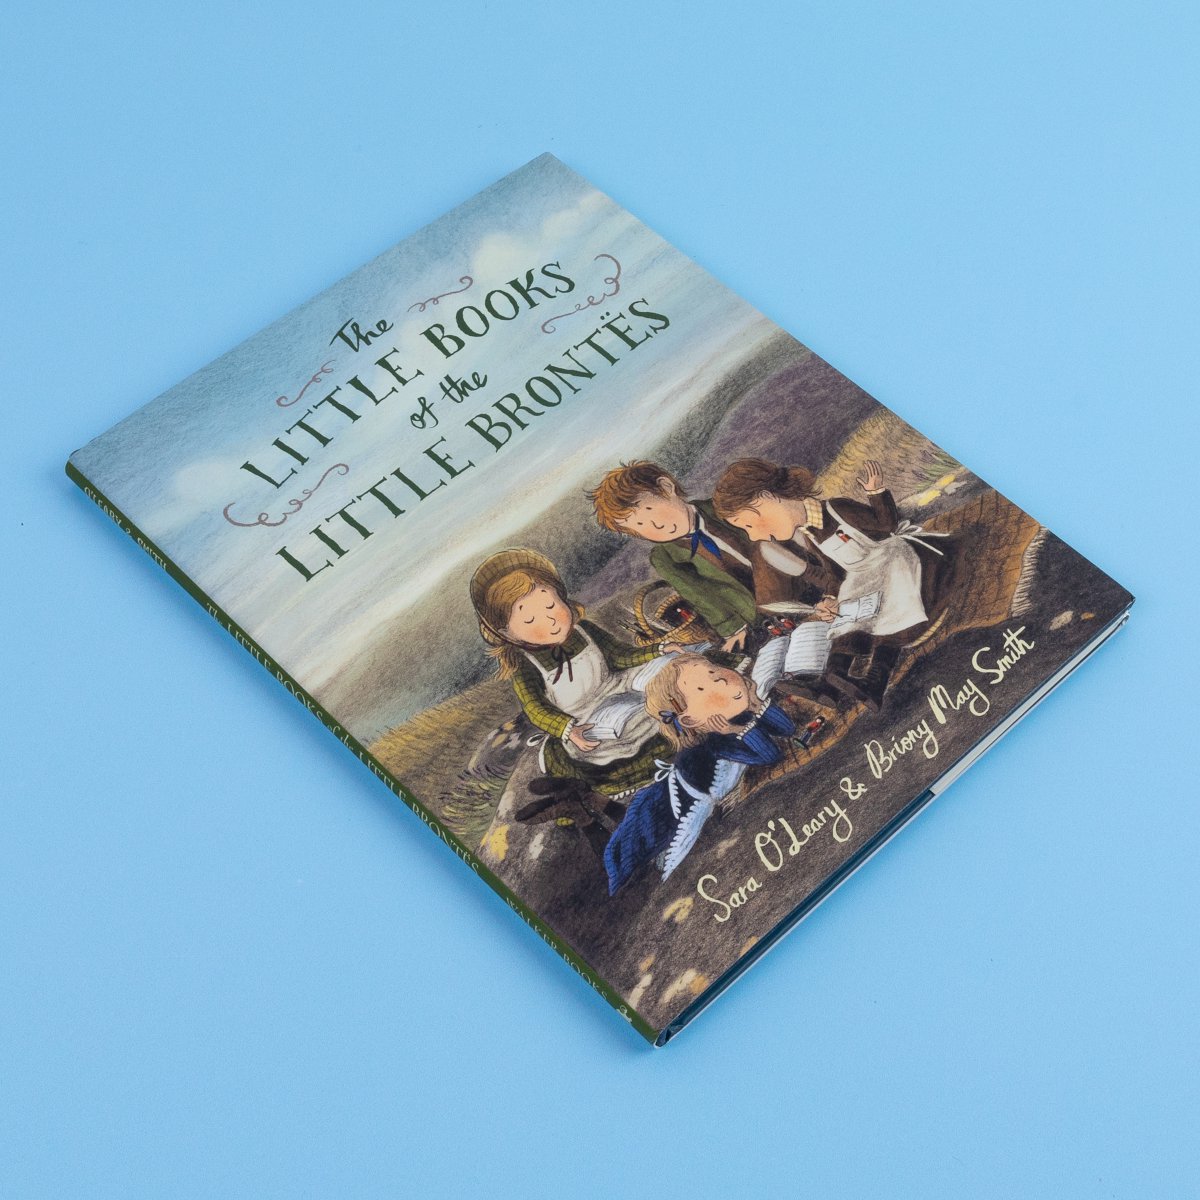 It's publication day for THE LITTLE BOOKS OF THE LITTLE BRONTES, the inspiring true tale of young siblings who loved to make stories – and grew up to be among English literature's finest writers. Be enchanted by @saraoleary and @BrionyMaySmith's bookmaking brilliance ✨